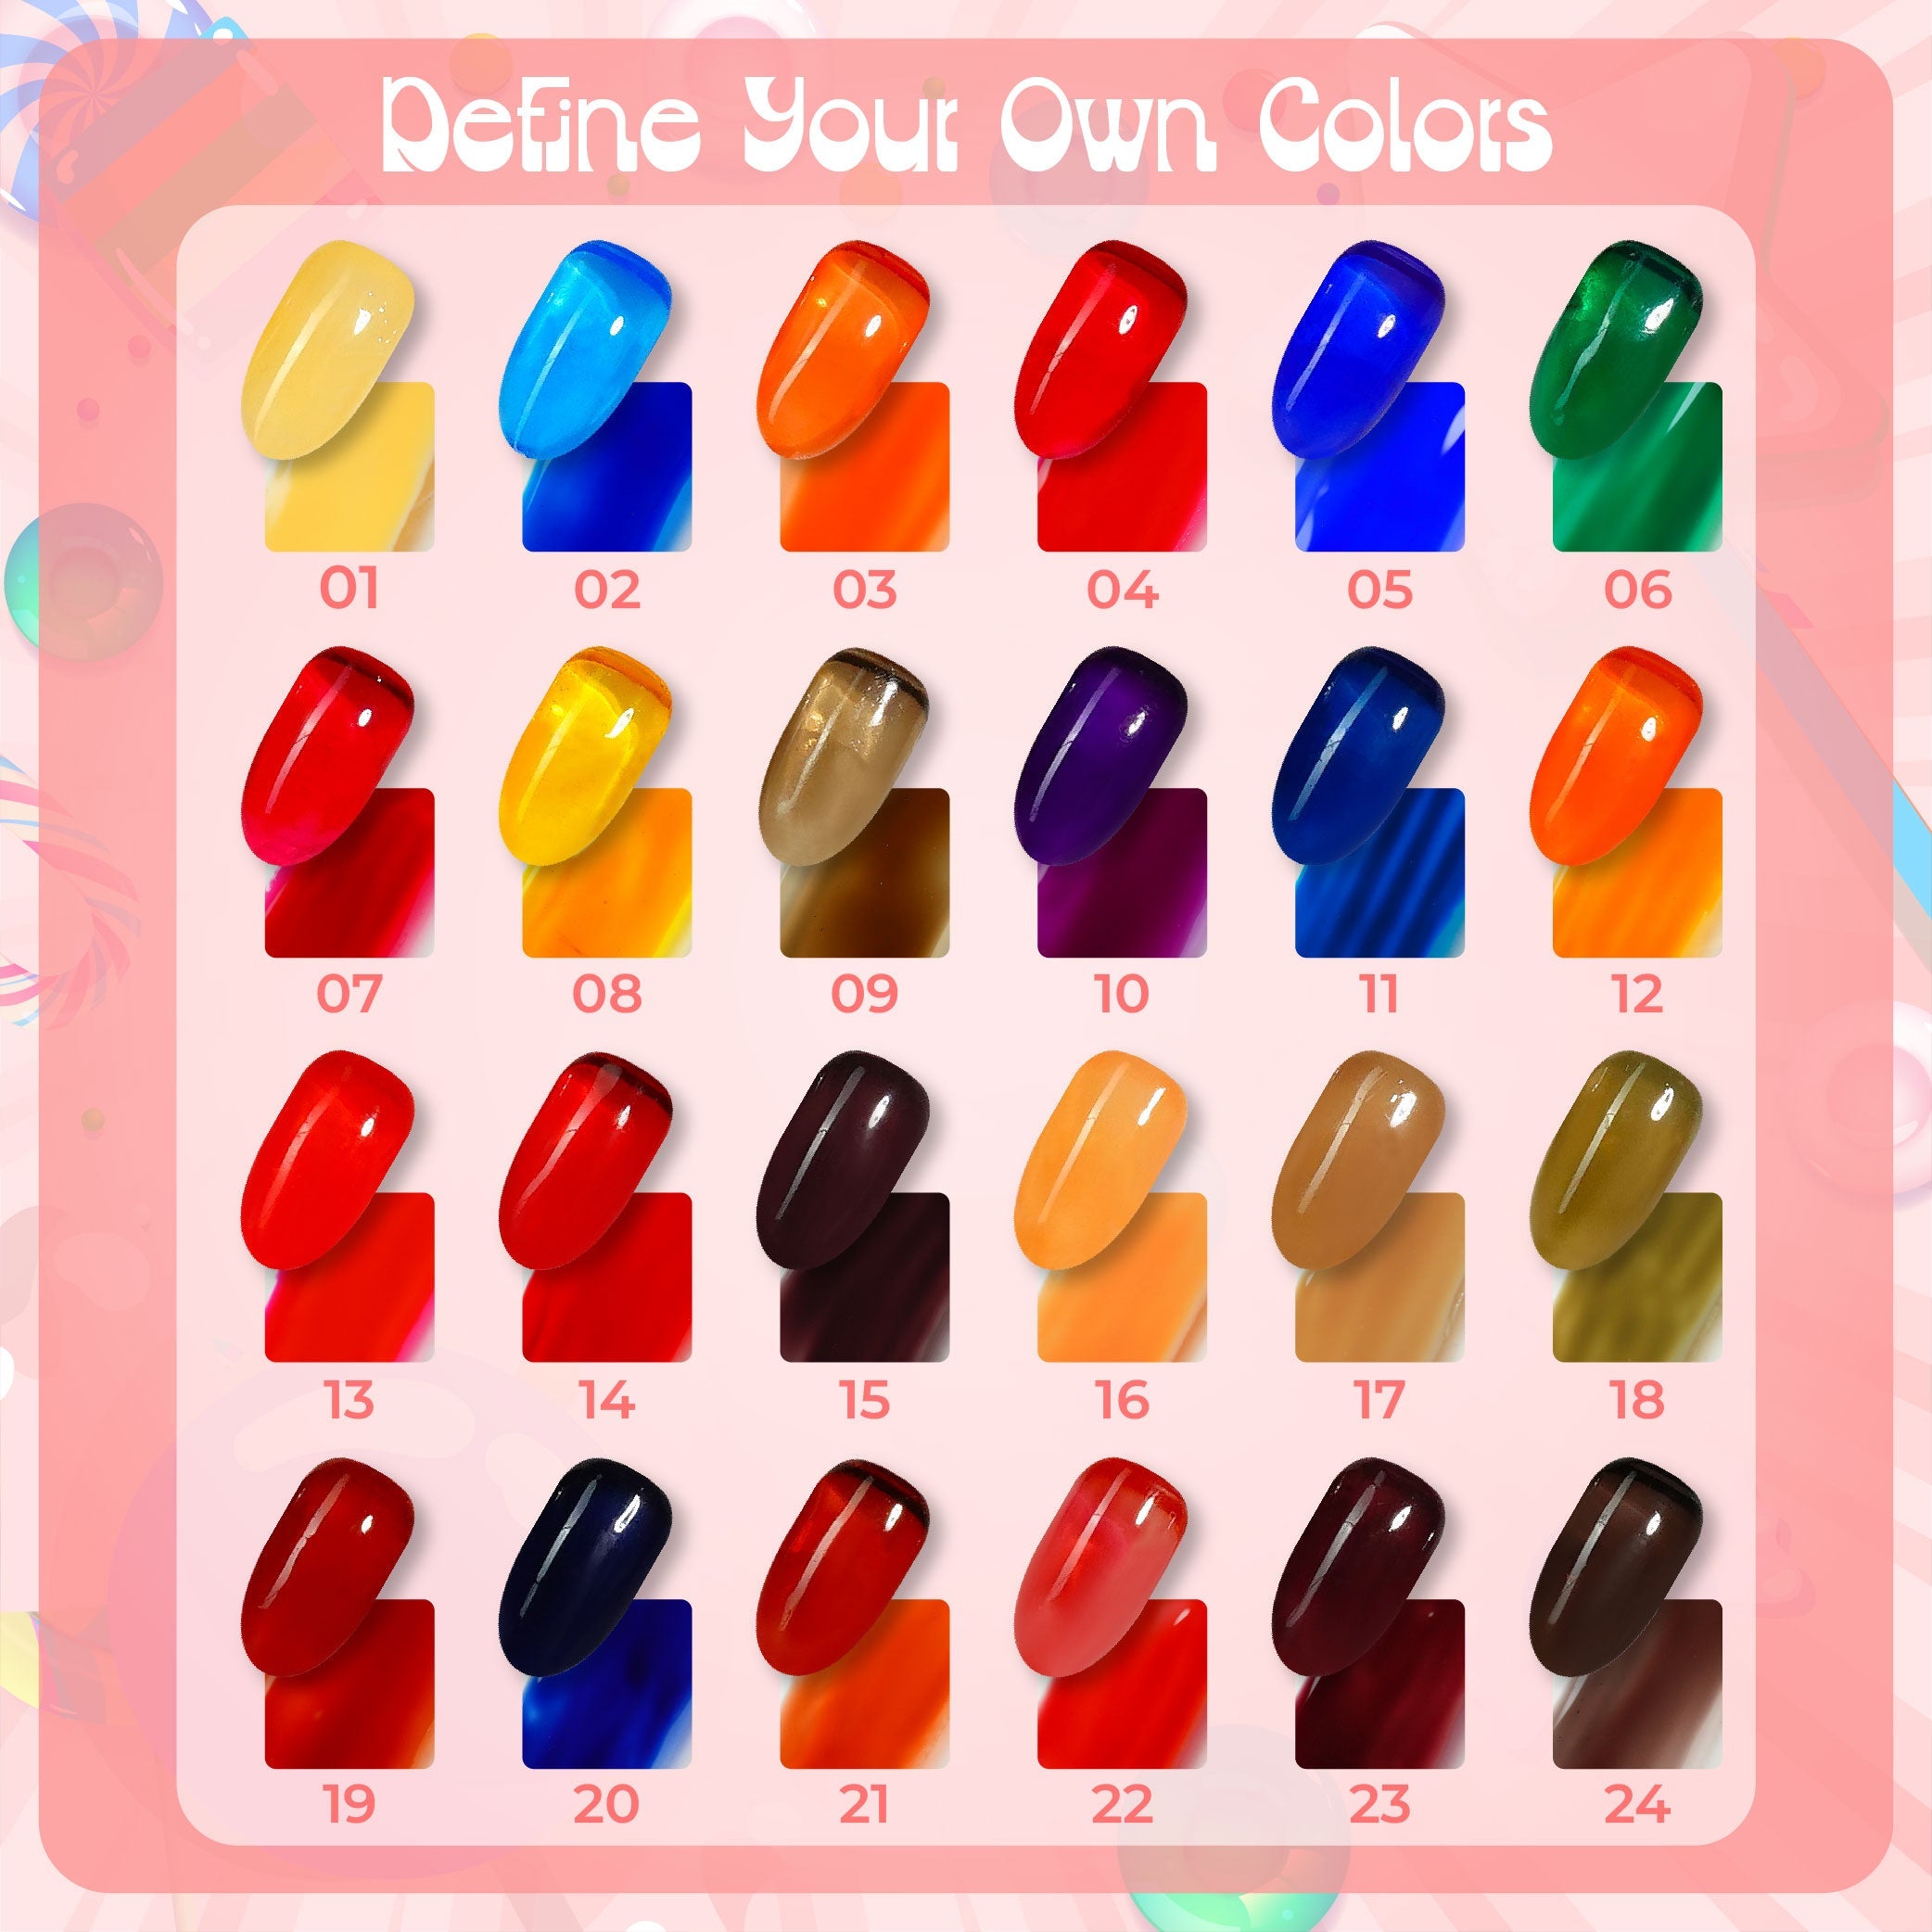 Jelly Gel Polish Colors - Lavis J02-12 - Candy Collection